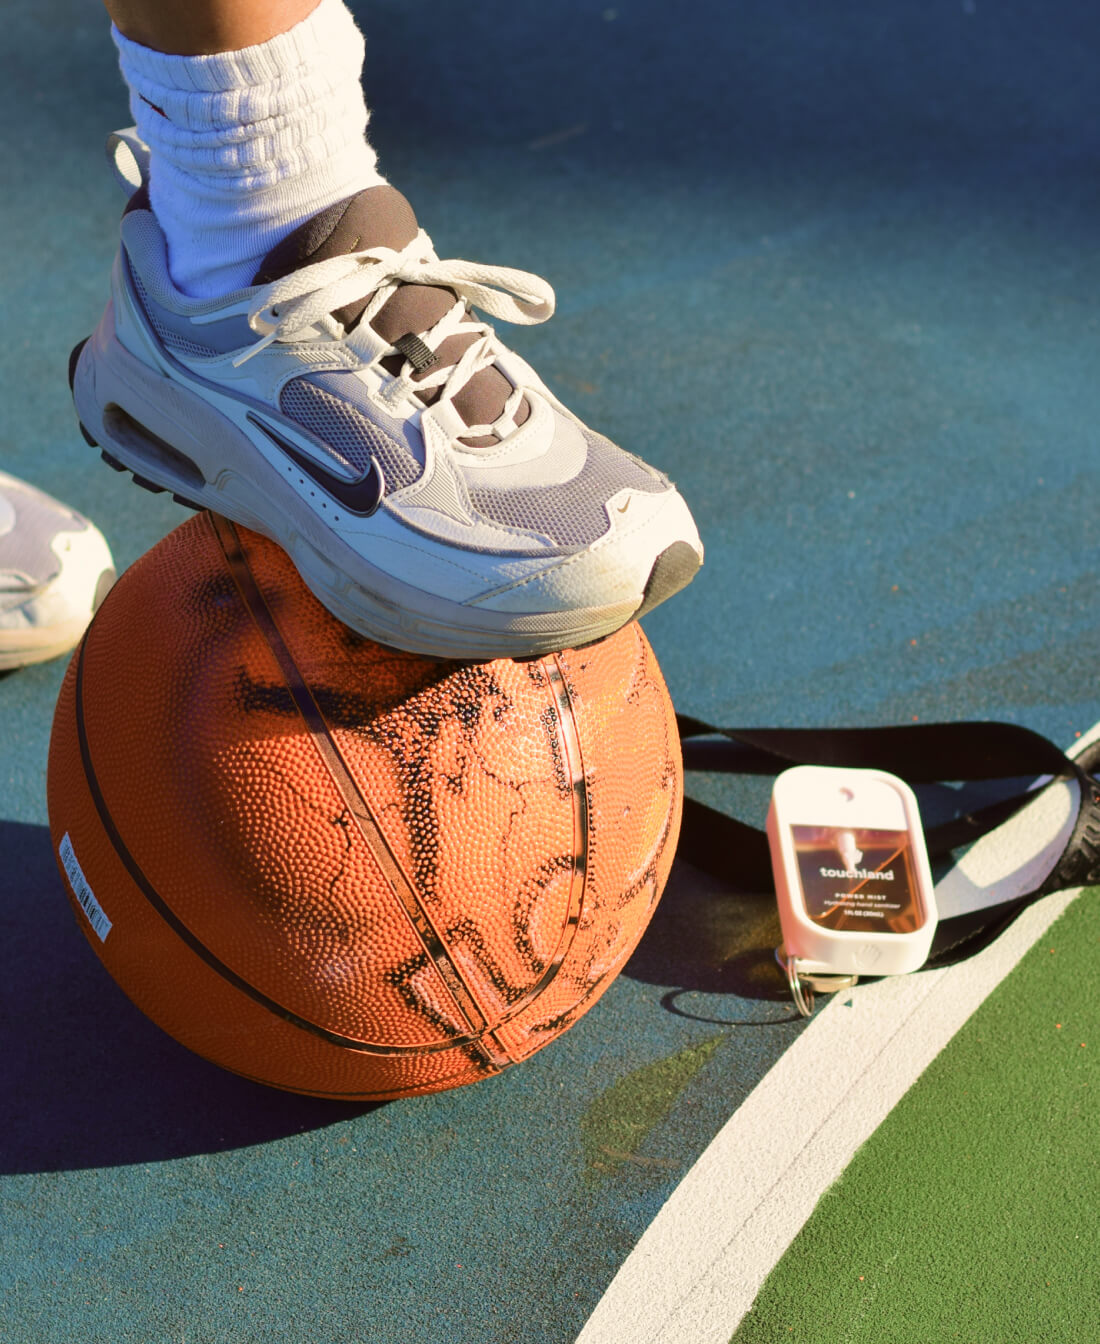 A woman with a foot on customized basketball with our Citrus Grove Power Mist next to it!